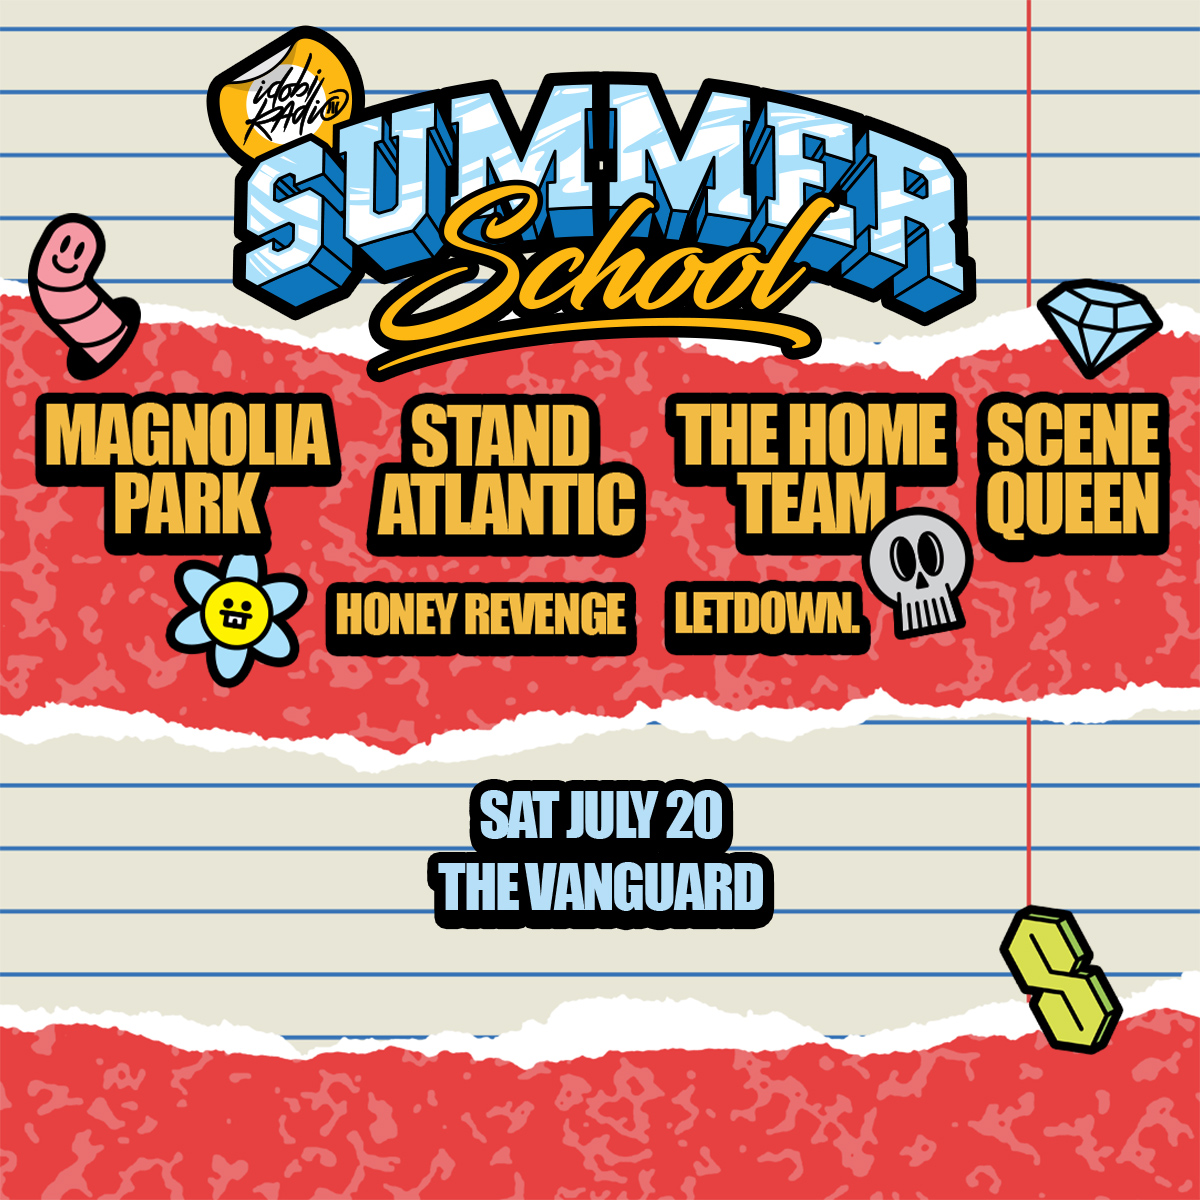 Prove to your mom it's not just a phase... Tix on sale now for Magnolia Park, Stand Atlantic, The Home Team, Scene Queen, Honey Revenge, and Let Down on Saturday, July 20! ✏️📚